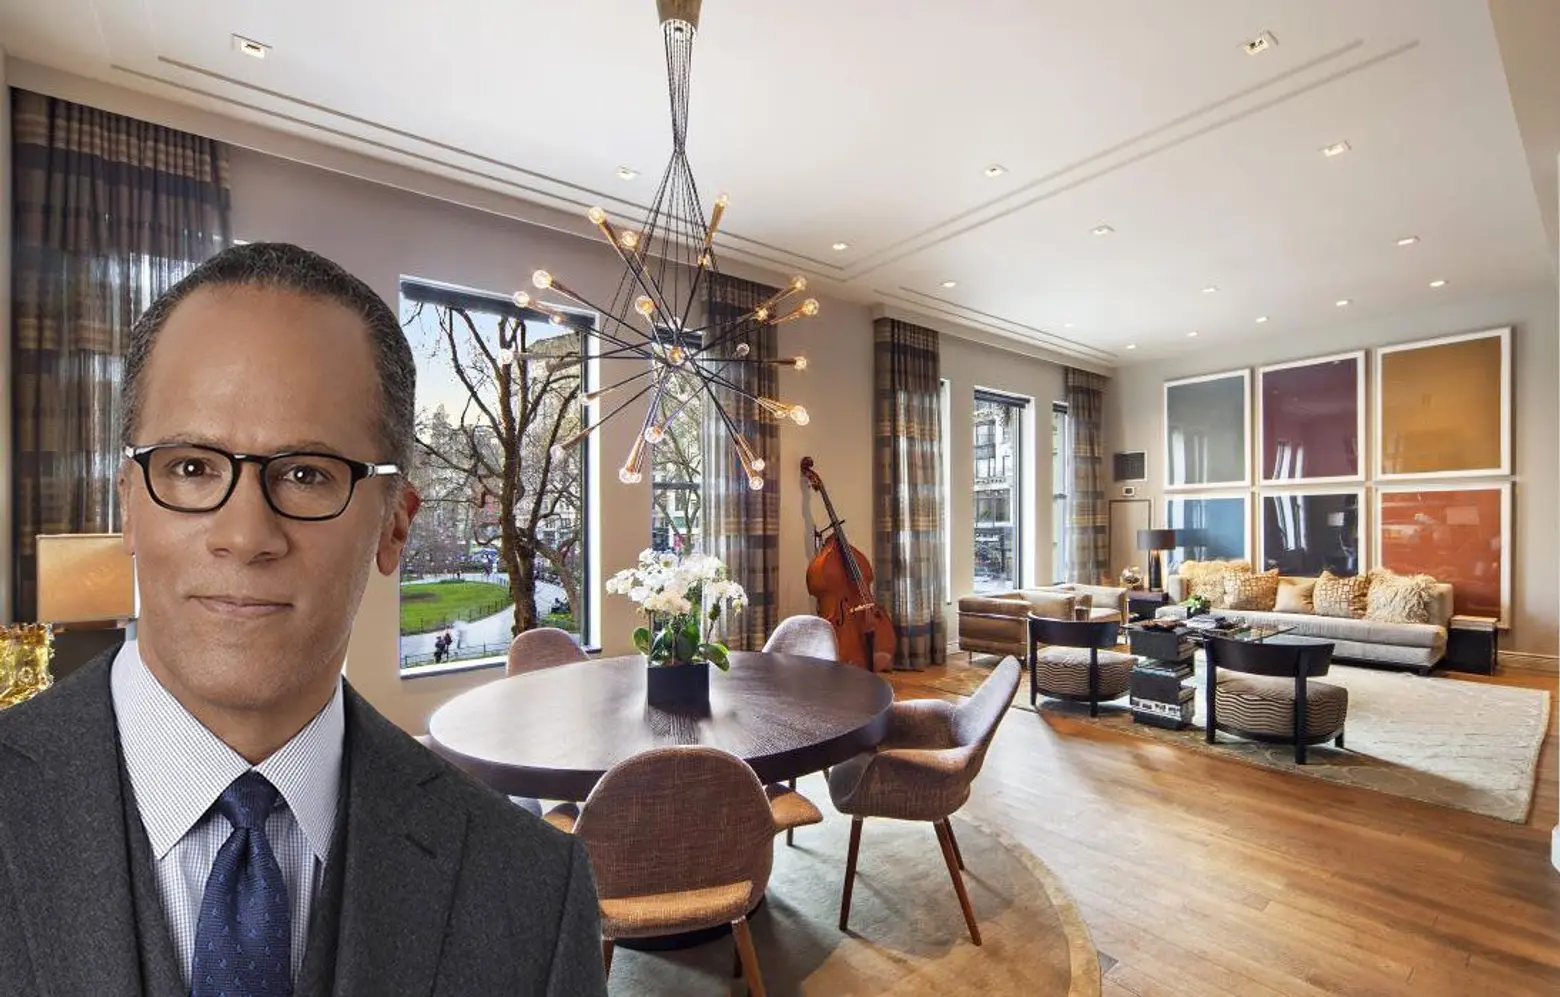 NBC News anchor Lester Holt lists classy Nomad apartment for $6.6M